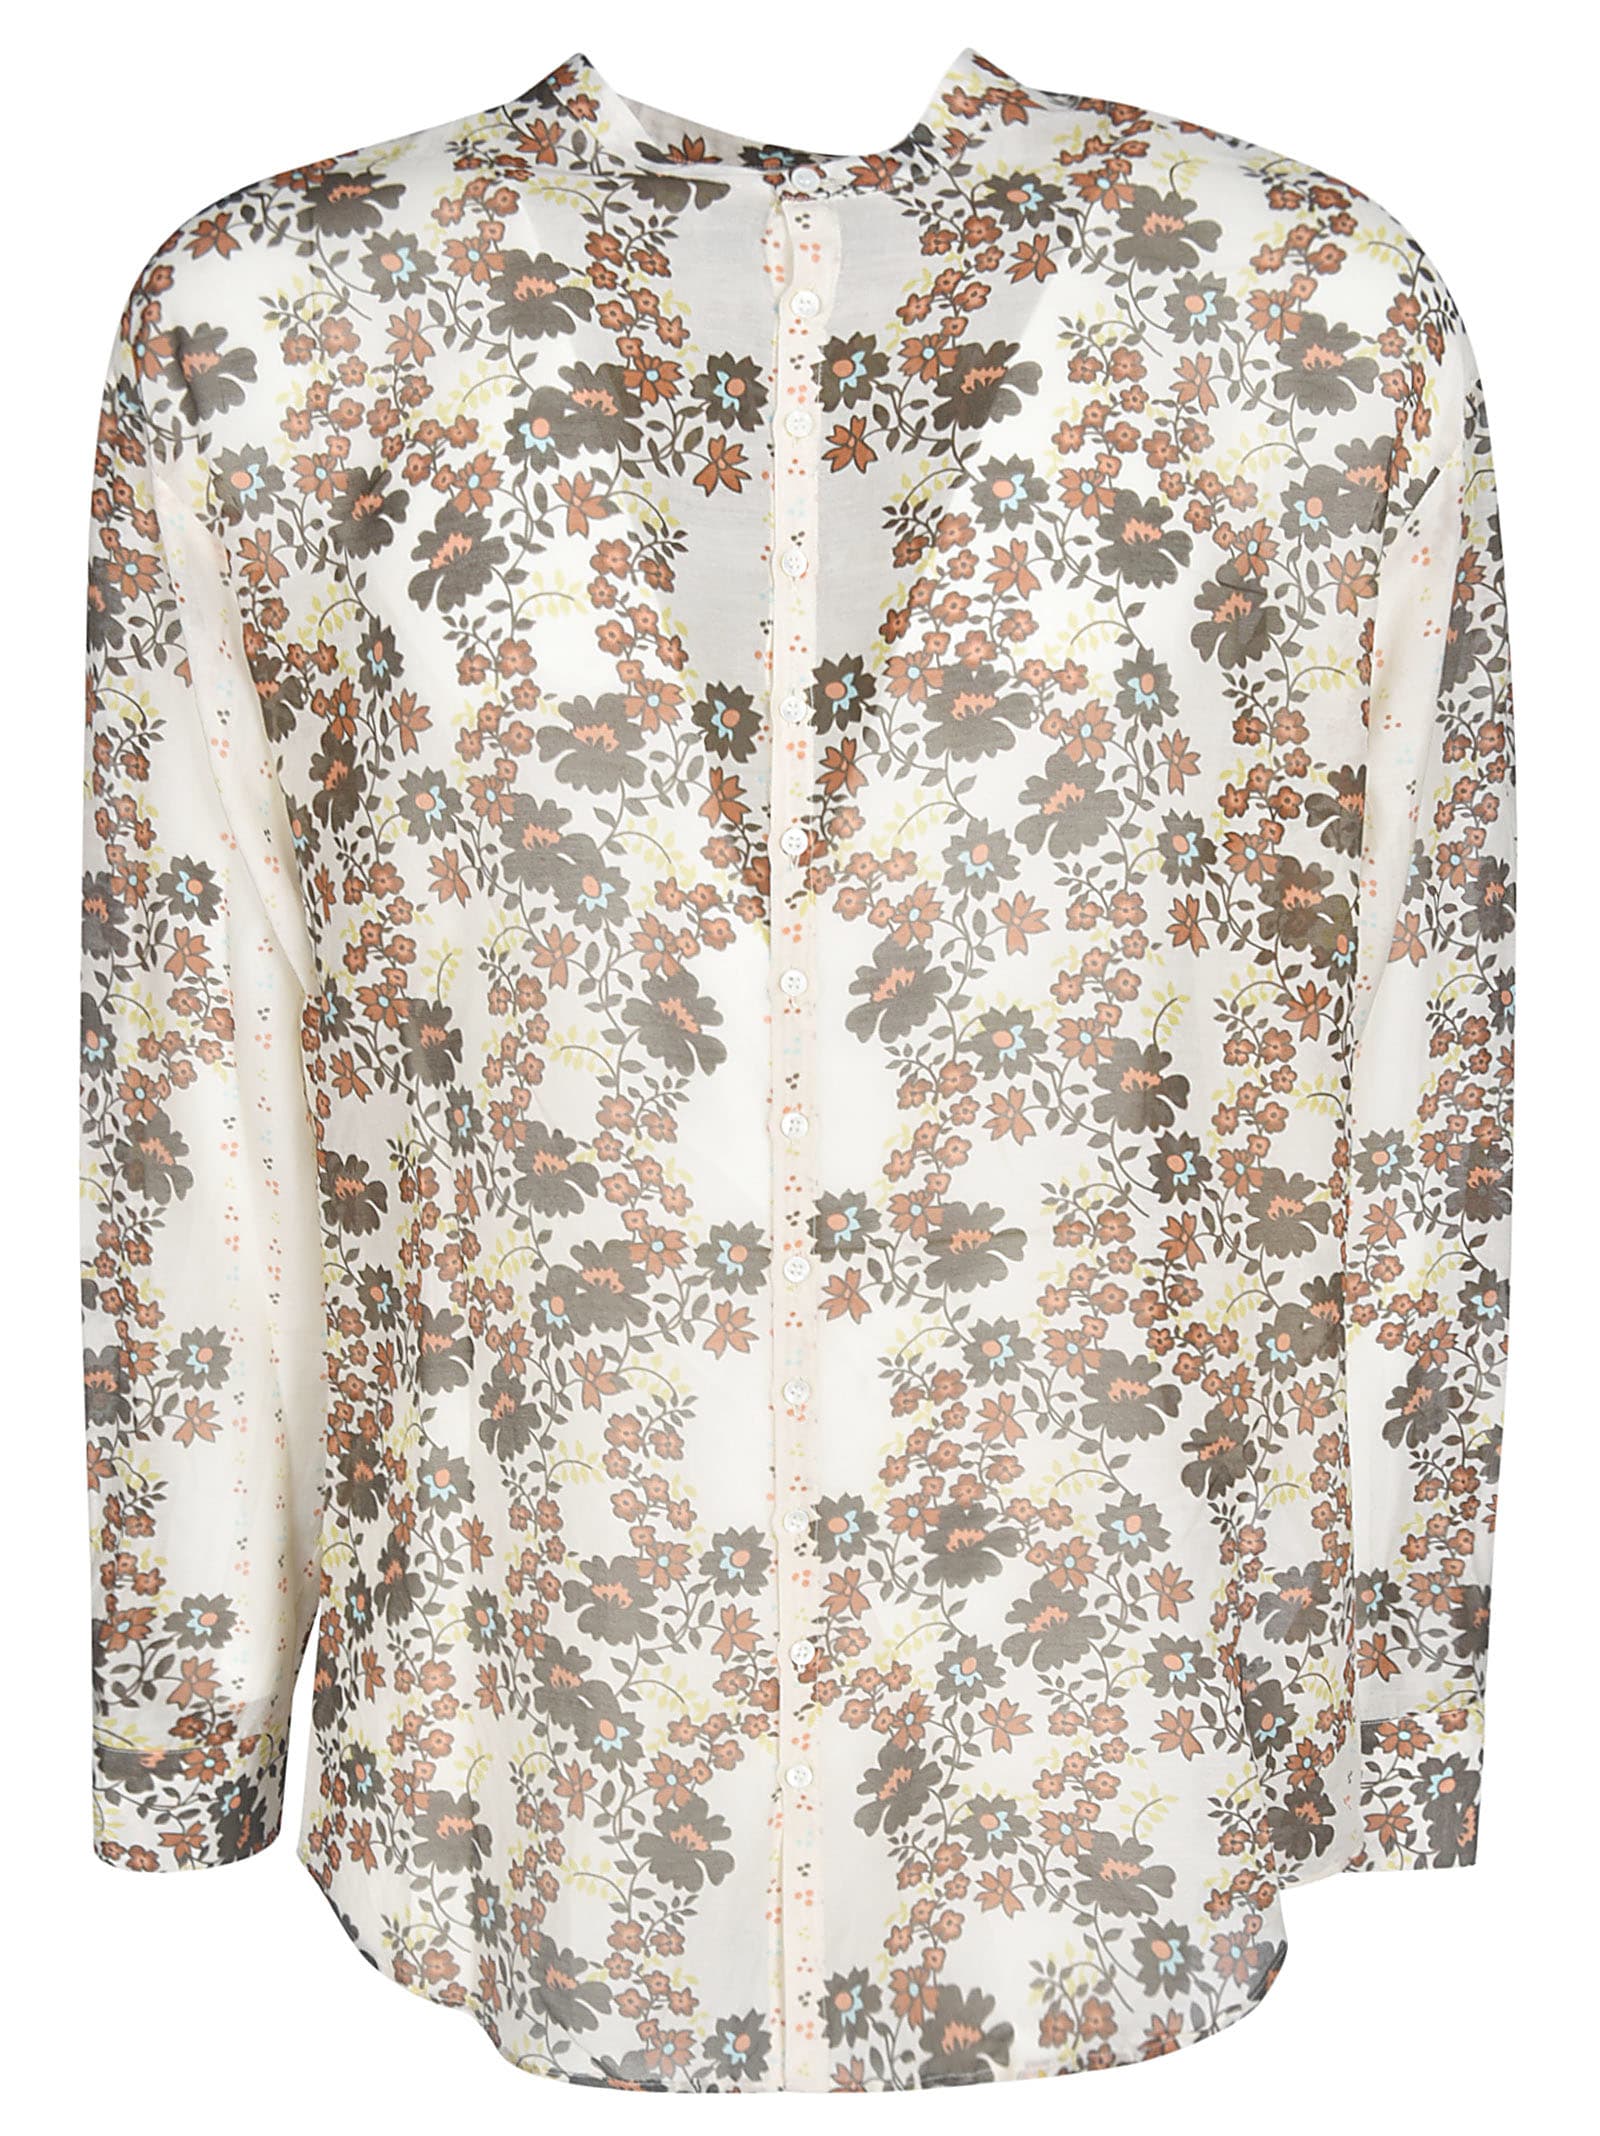 DSQUARED2 FLORAL PRINT ROUND COLLAR SHIRT,11250356